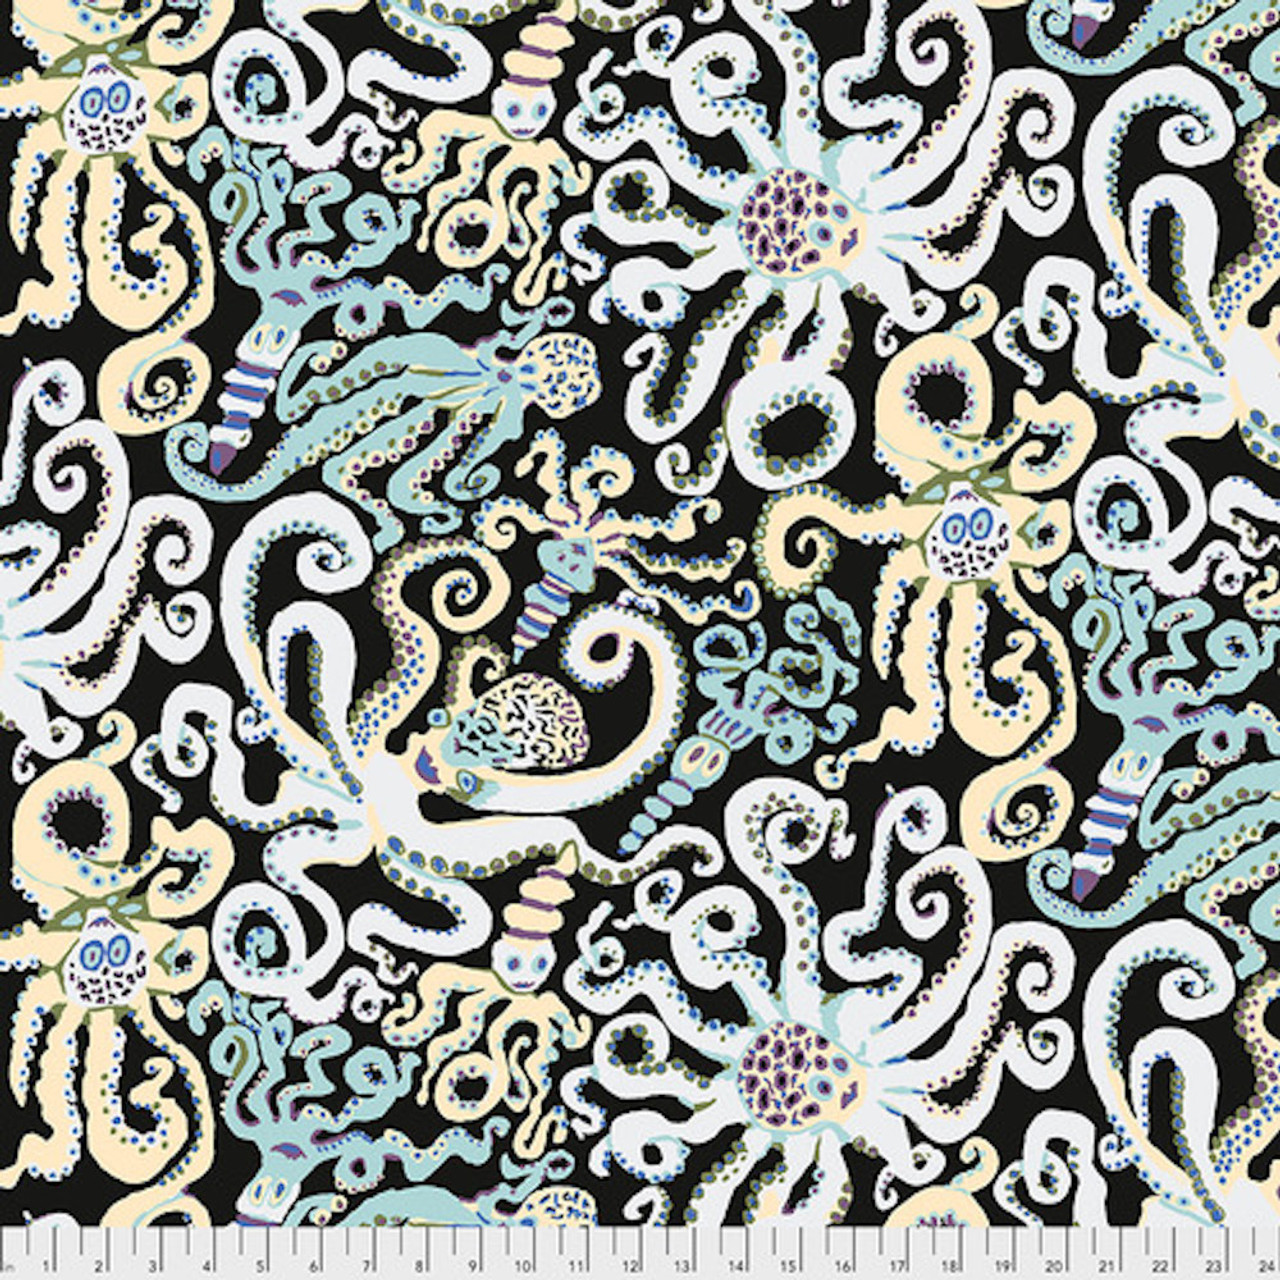 Brandon Mably PWBM074 Octopus Black Cotton Fabric By The Yard